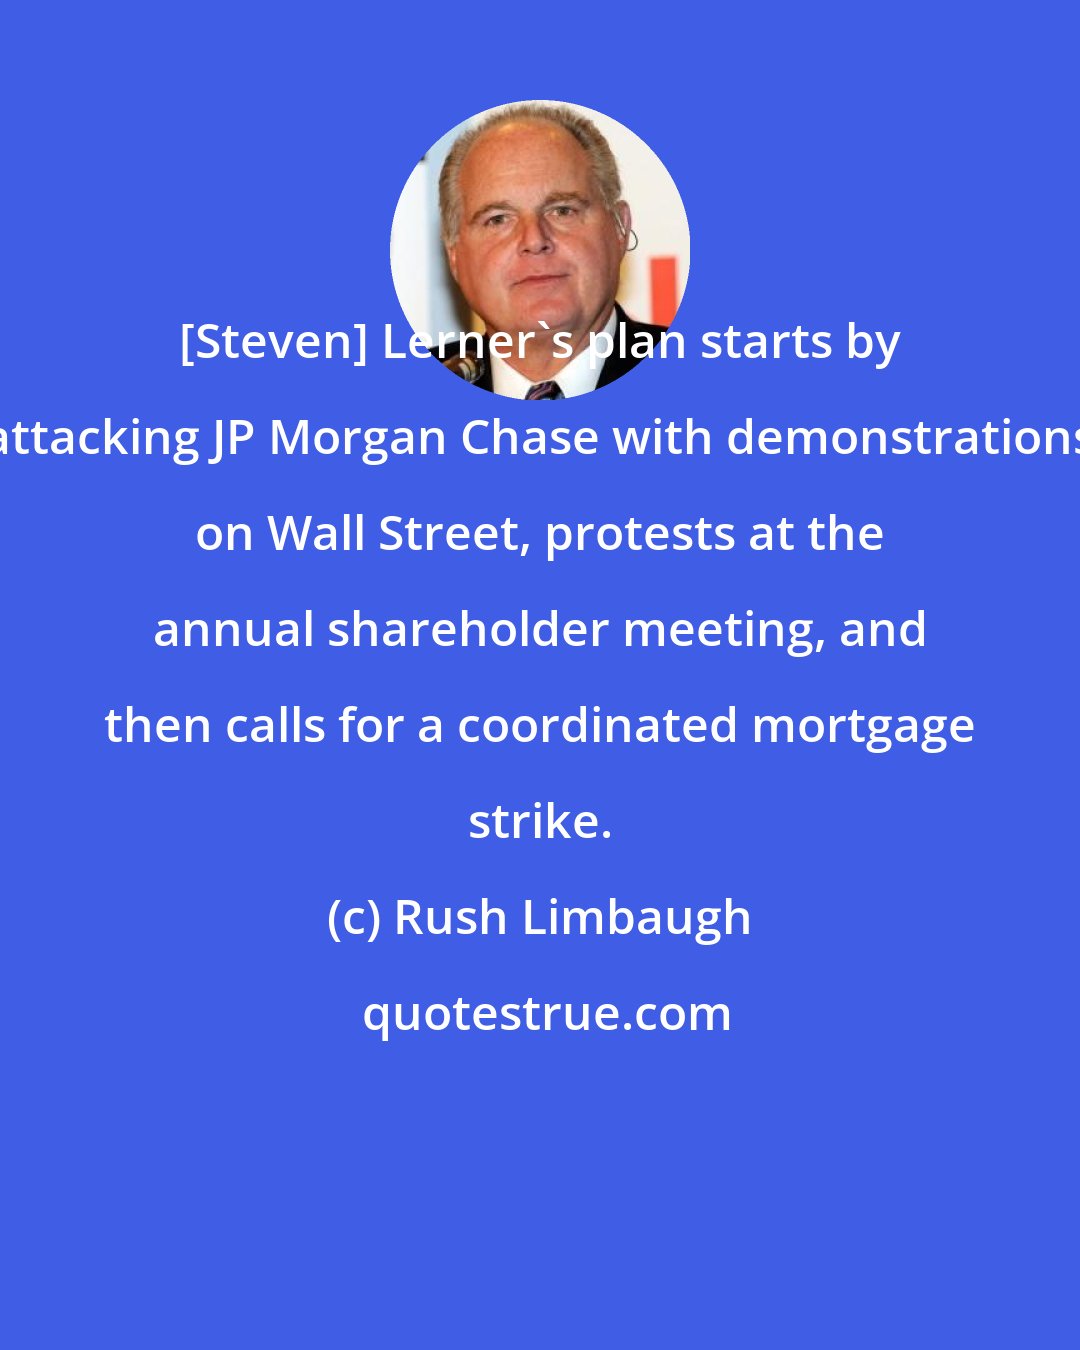 Rush Limbaugh: [Steven] Lerner's plan starts by attacking JP Morgan Chase with demonstrations on Wall Street, protests at the annual shareholder meeting, and then calls for a coordinated mortgage strike.